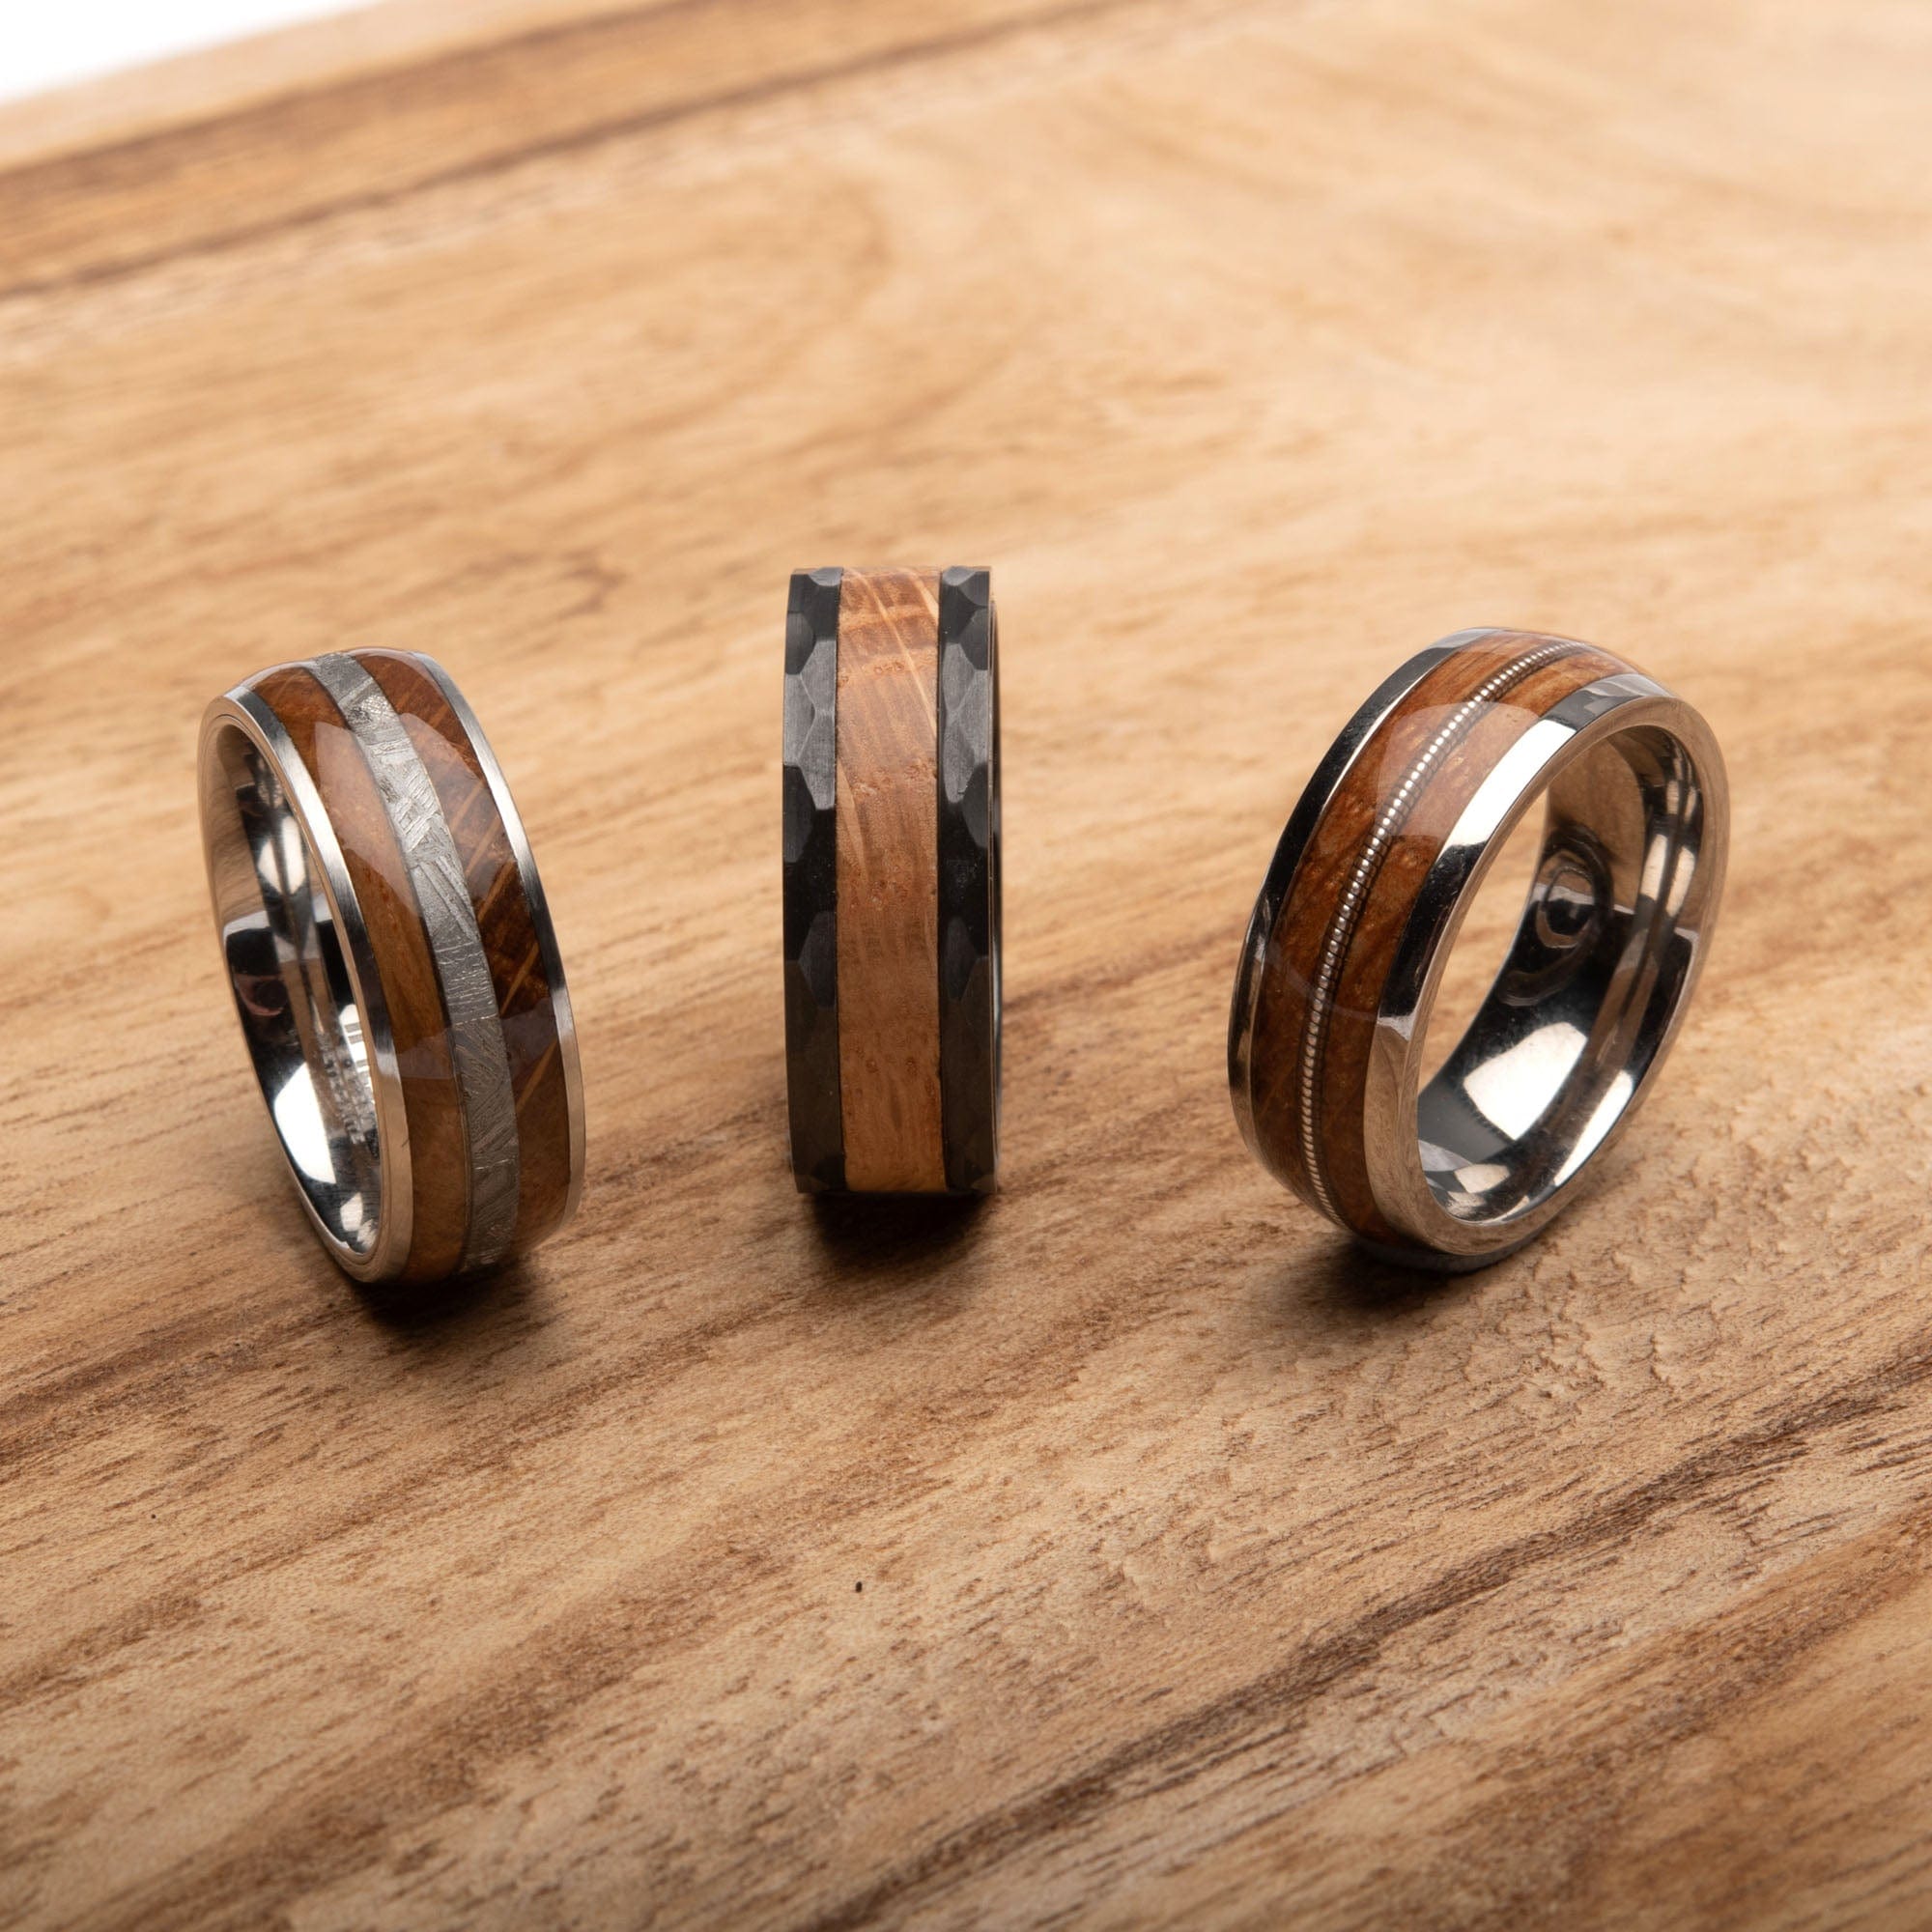 INOX JEWELRY Rings Black Stainless Steel Band with Whiskey Barrel Wooden Inlay